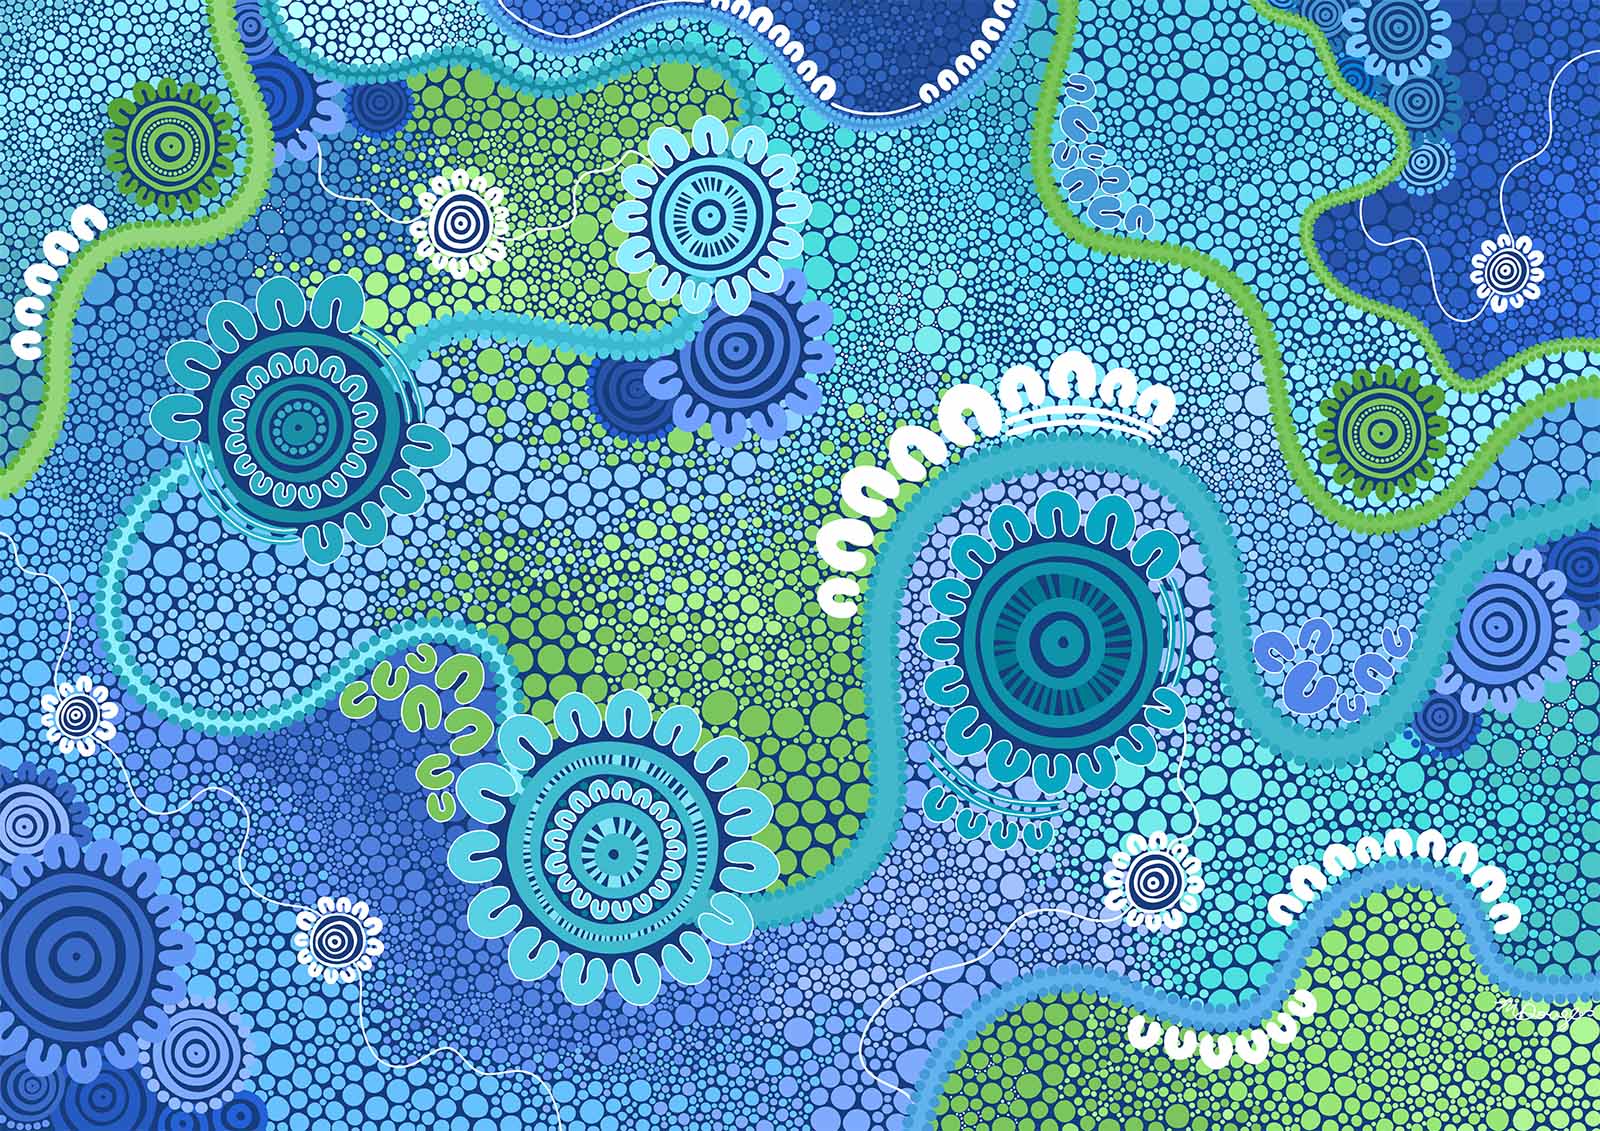 Rest's Reflect Reconciliation Action Plan artwork designed by Maggie-Jean